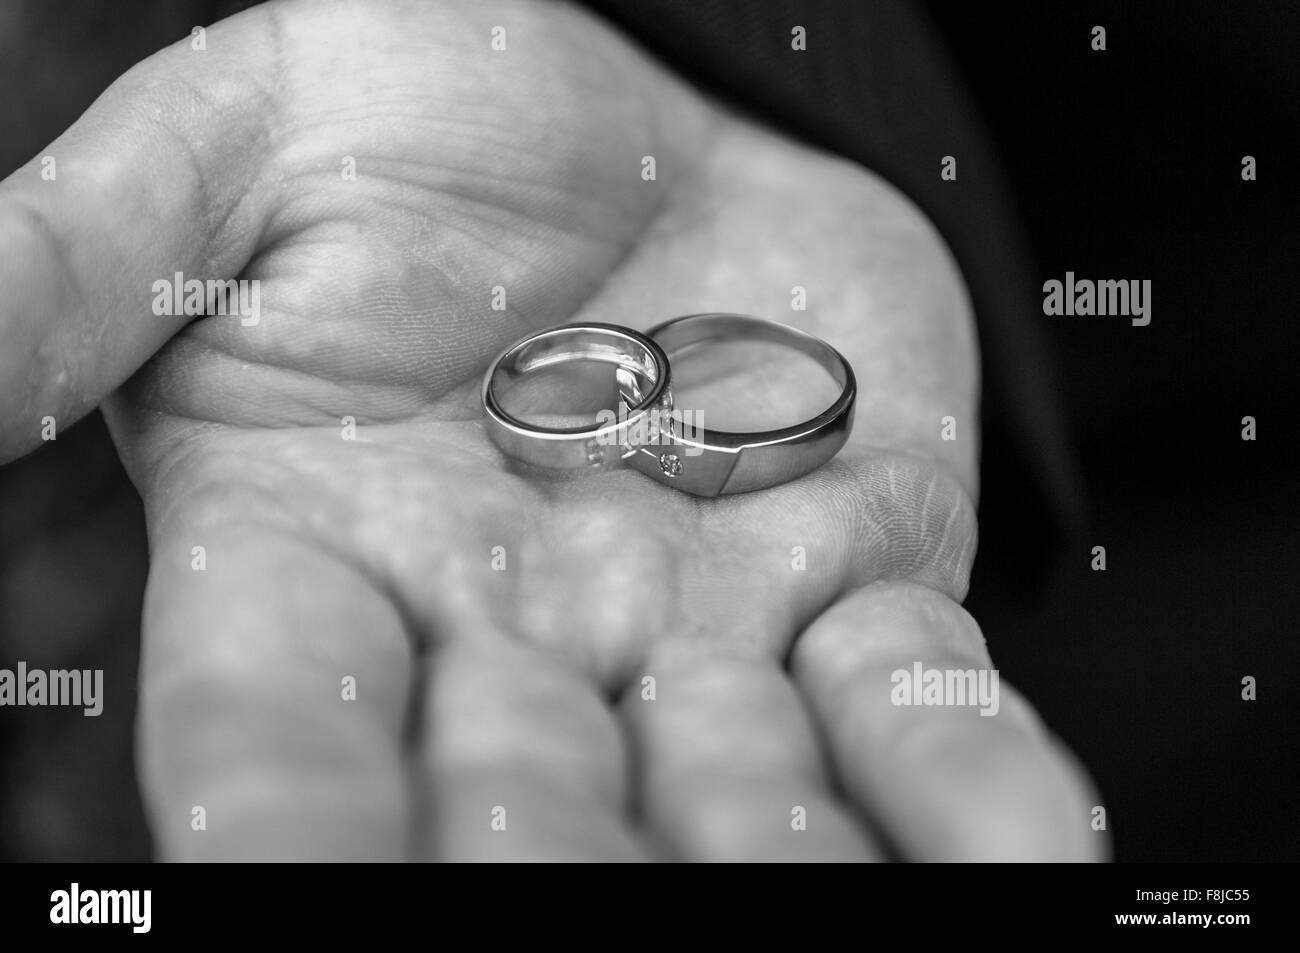 Wedding ring on the hand Stock Photo